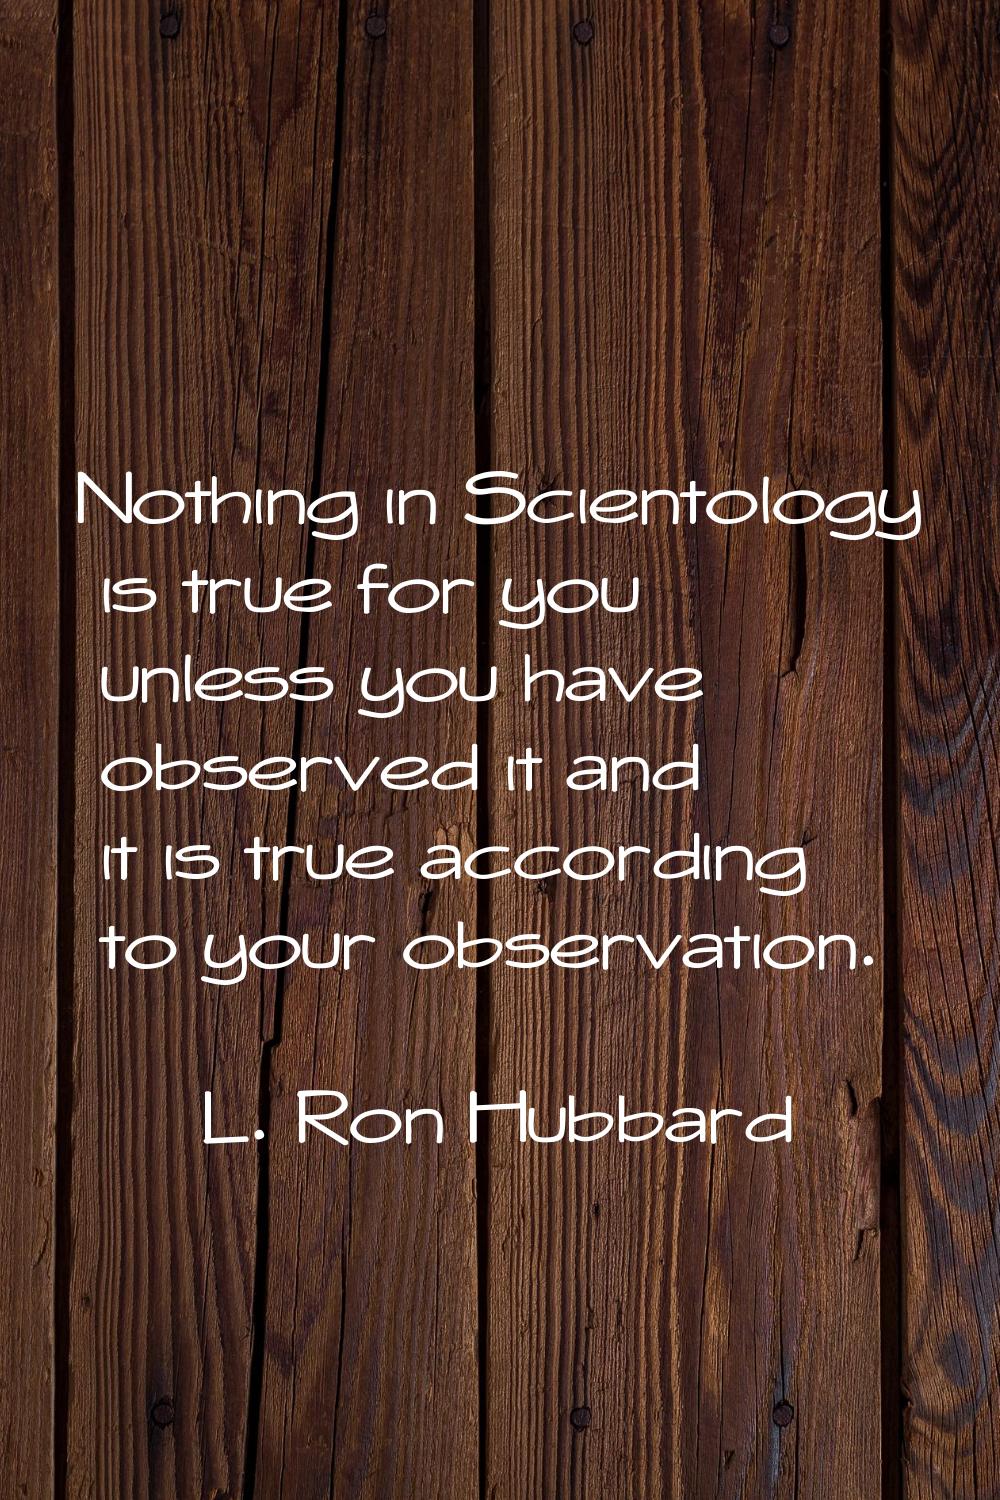 Nothing in Scientology is true for you unless you have observed it and it is true according to your